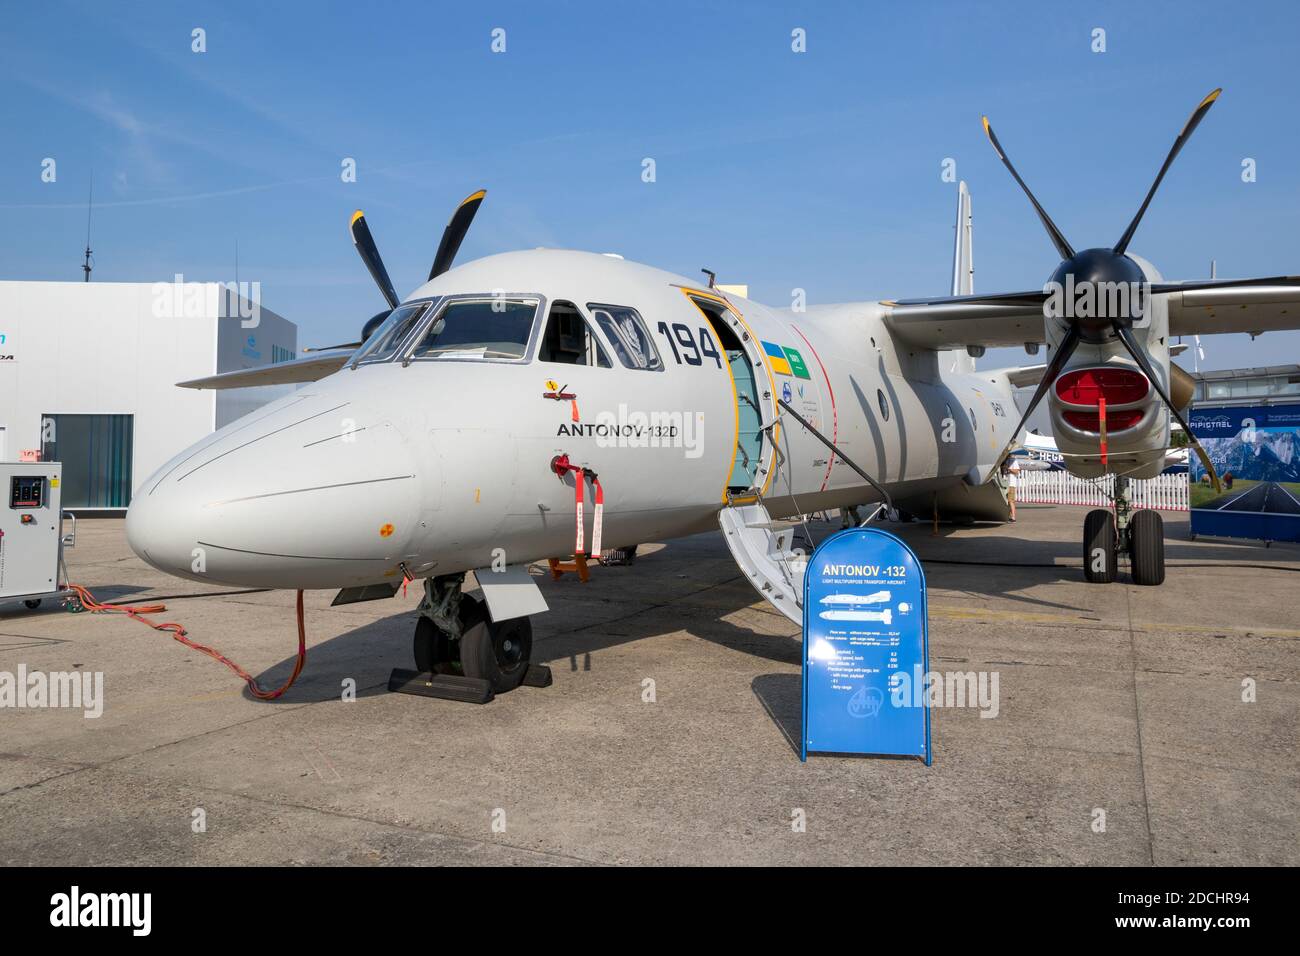 Antonov An-132D military transport aircraft. An improved version of the An-32 developed jointly by Saudi Arabia and Ukraine. PARIS, FRANCE - JUN 23, 2 Stock Photo